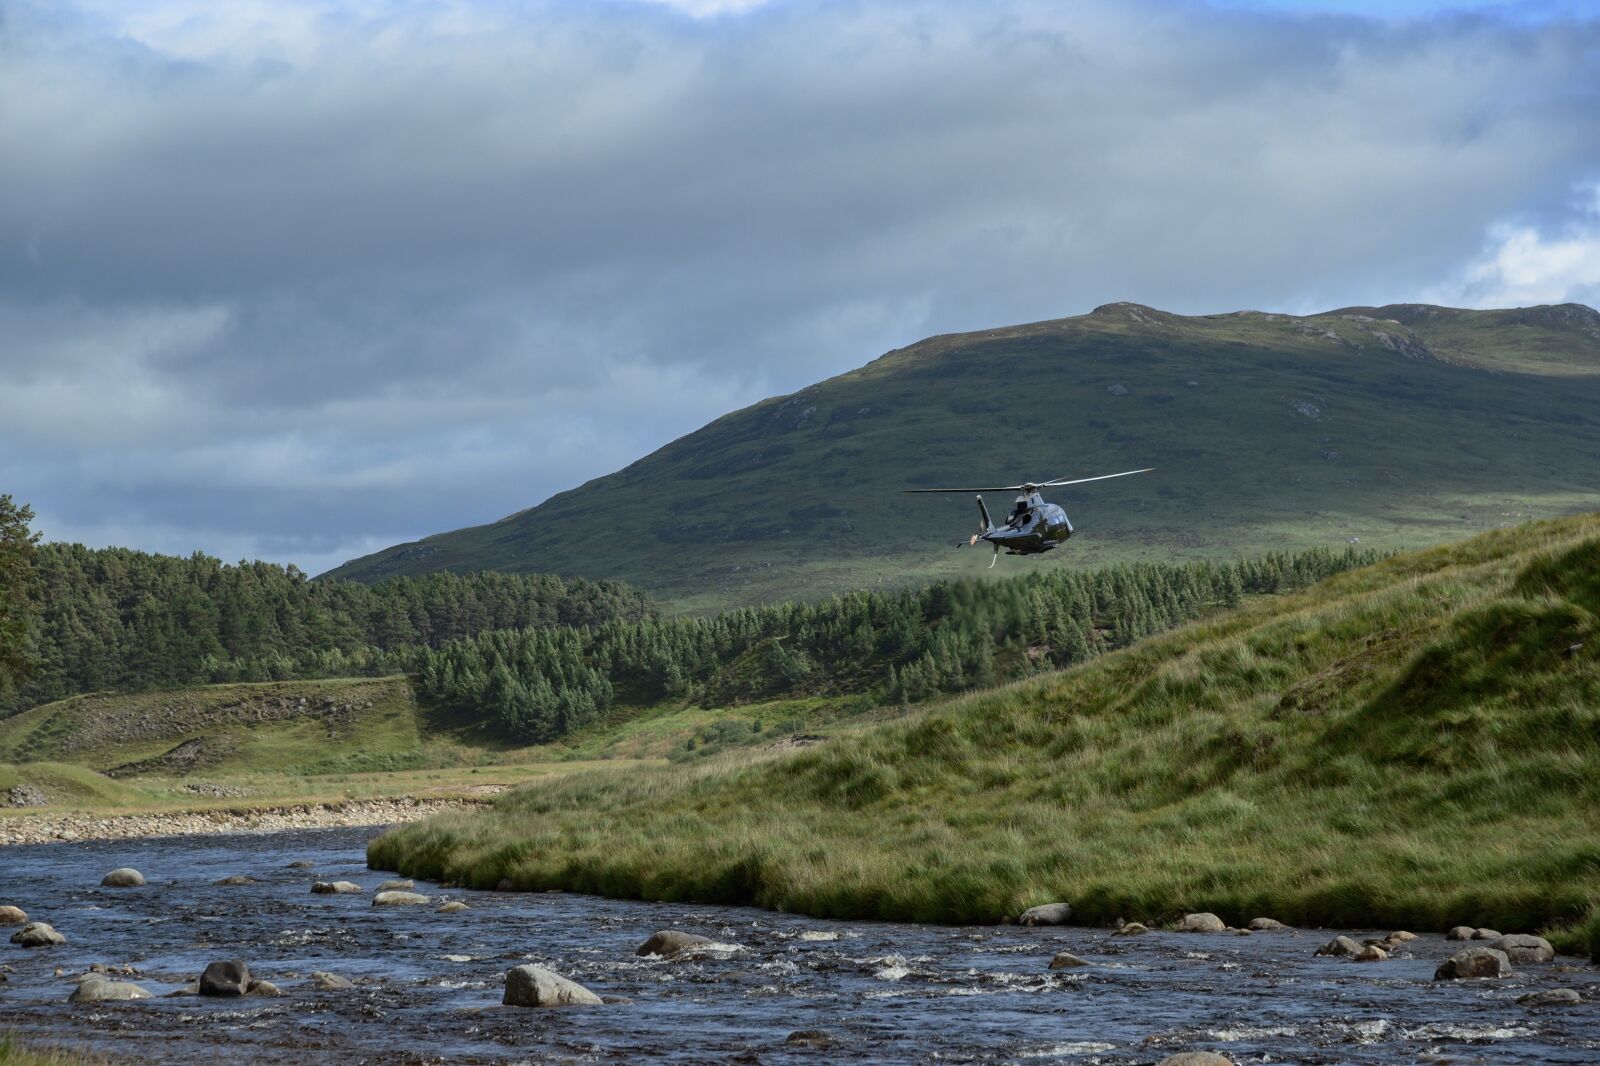 Helicopter in Scotland for for James Bond experiences